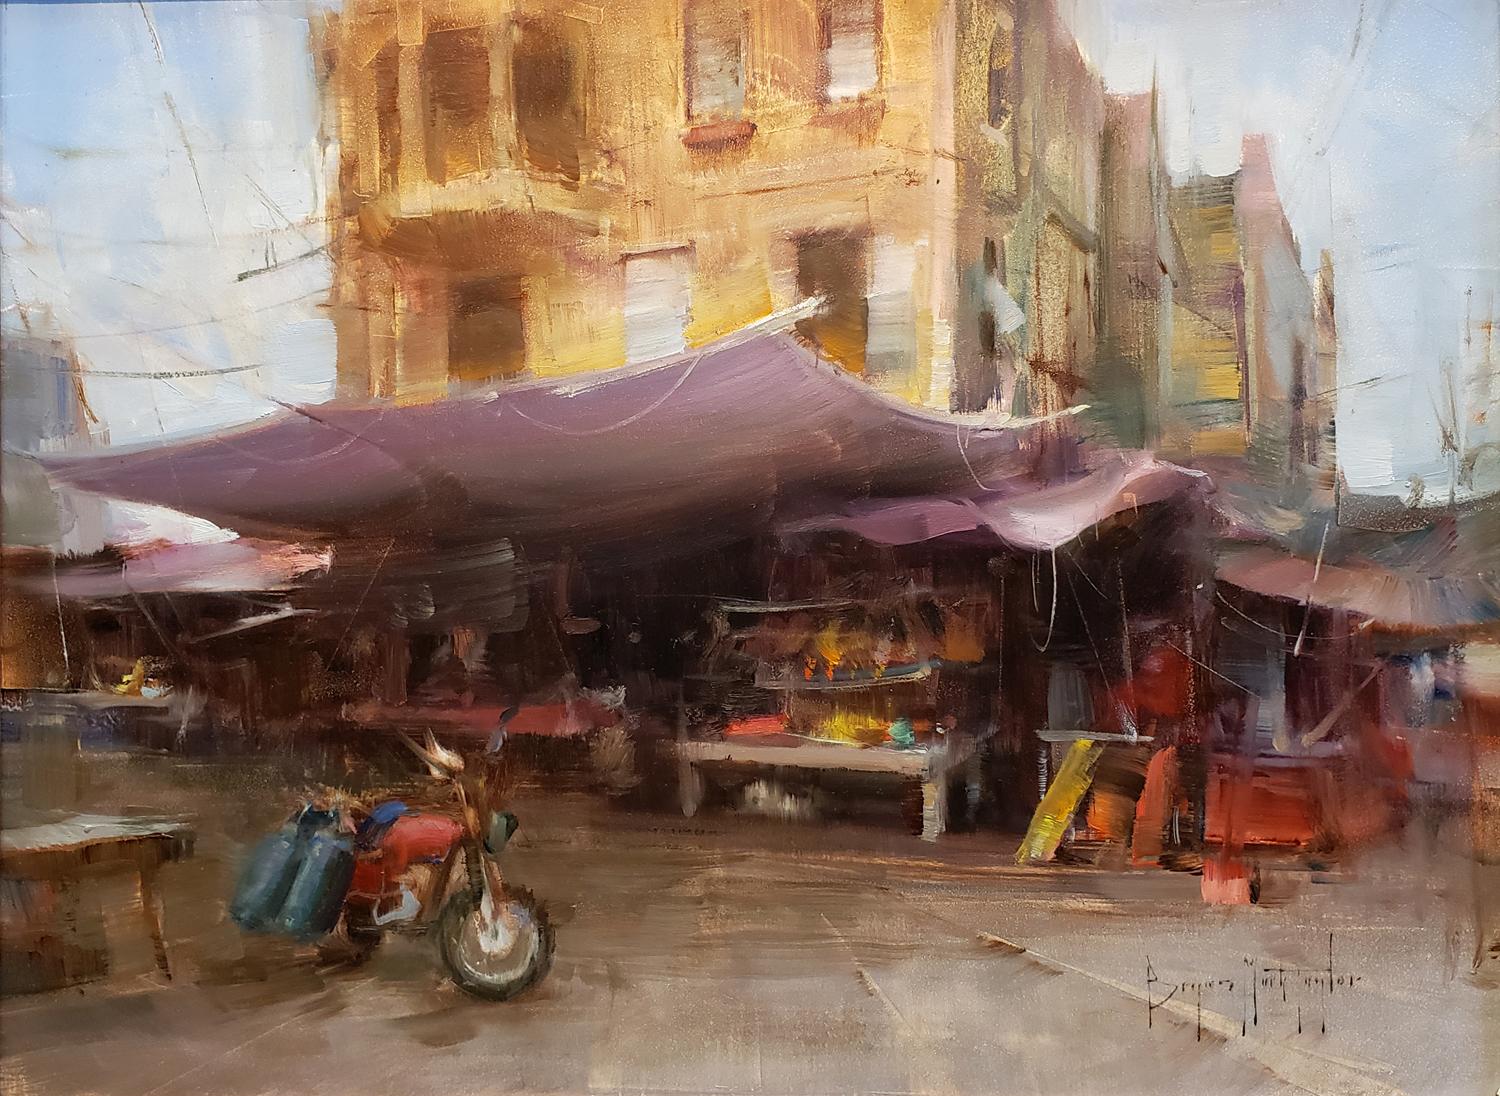 Market Day - Painting by Bryan Mark Taylor